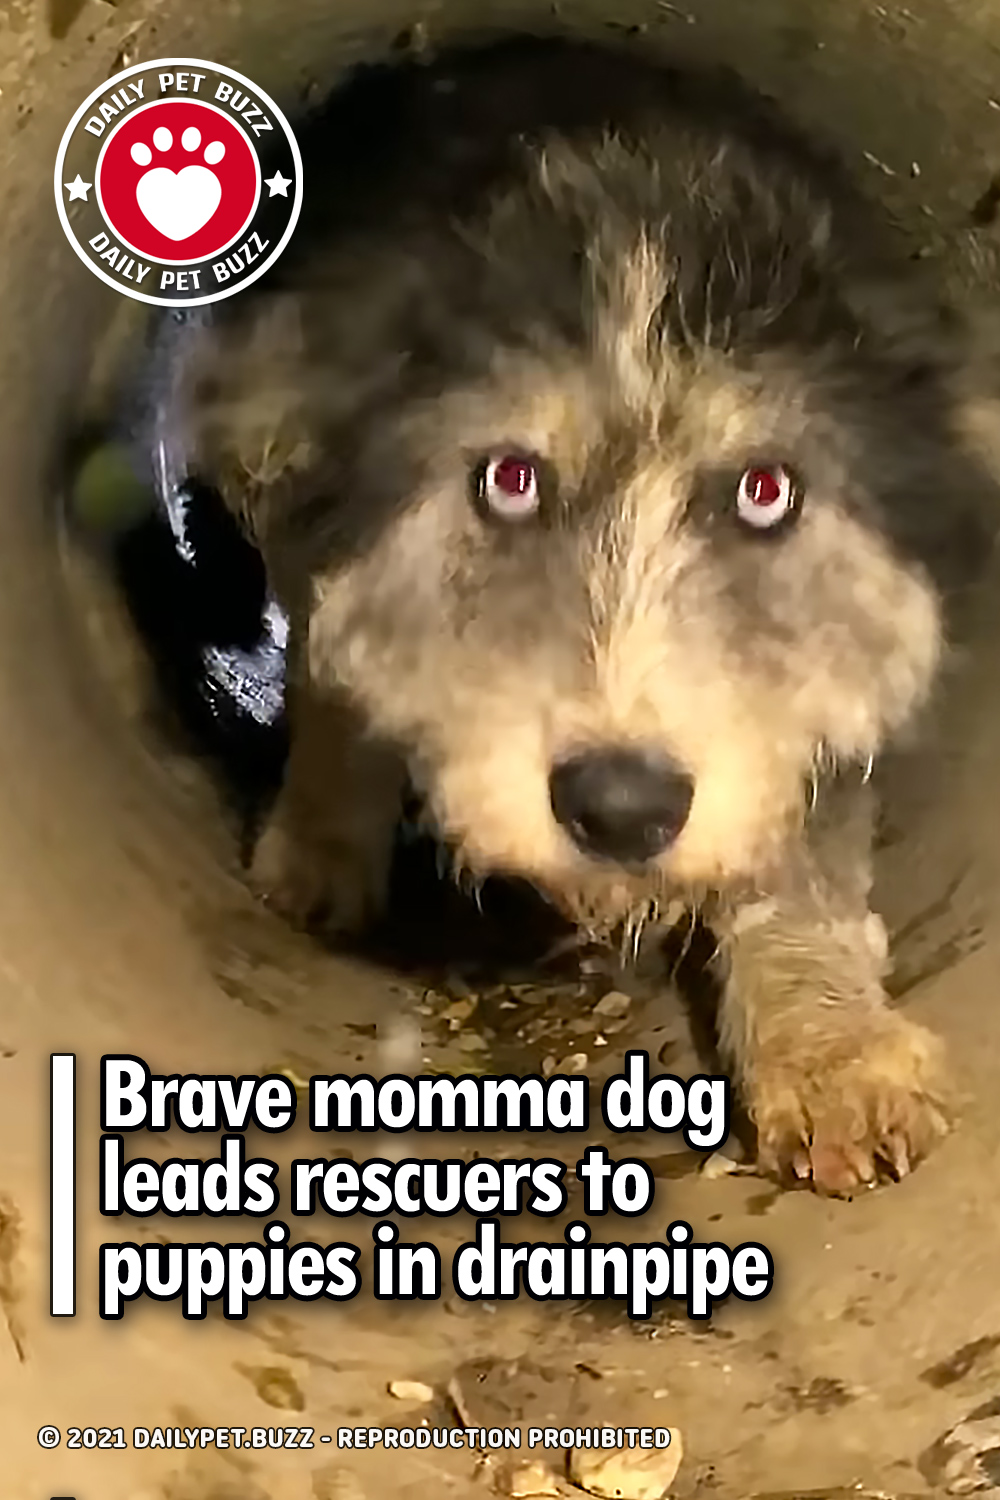 Brave momma dog leads rescuers to puppies in drainpipe